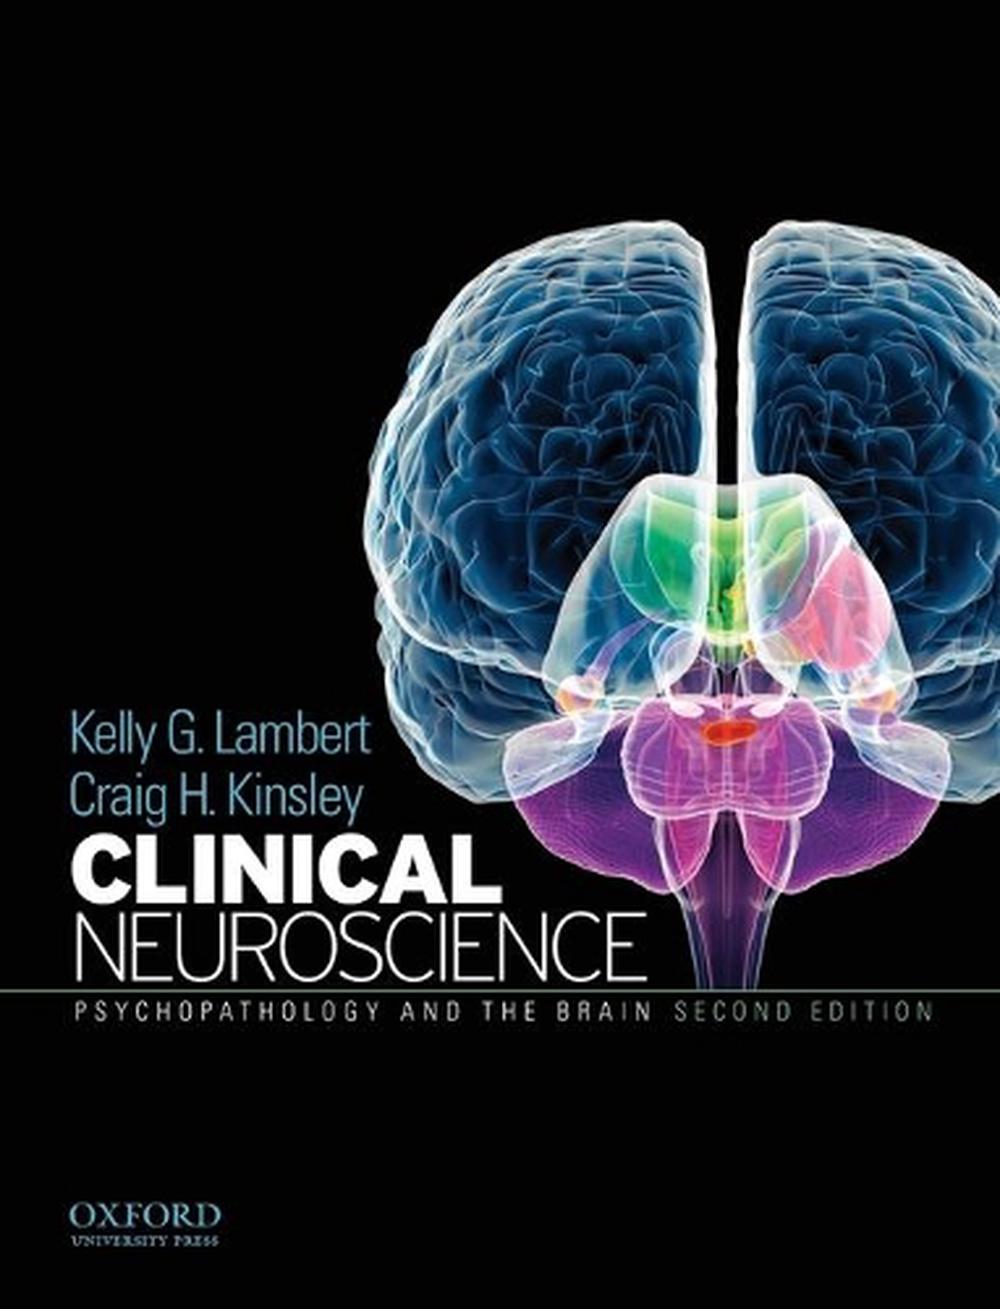 Clinical Neuroscience Psychopathology and the Brain by Kelly G